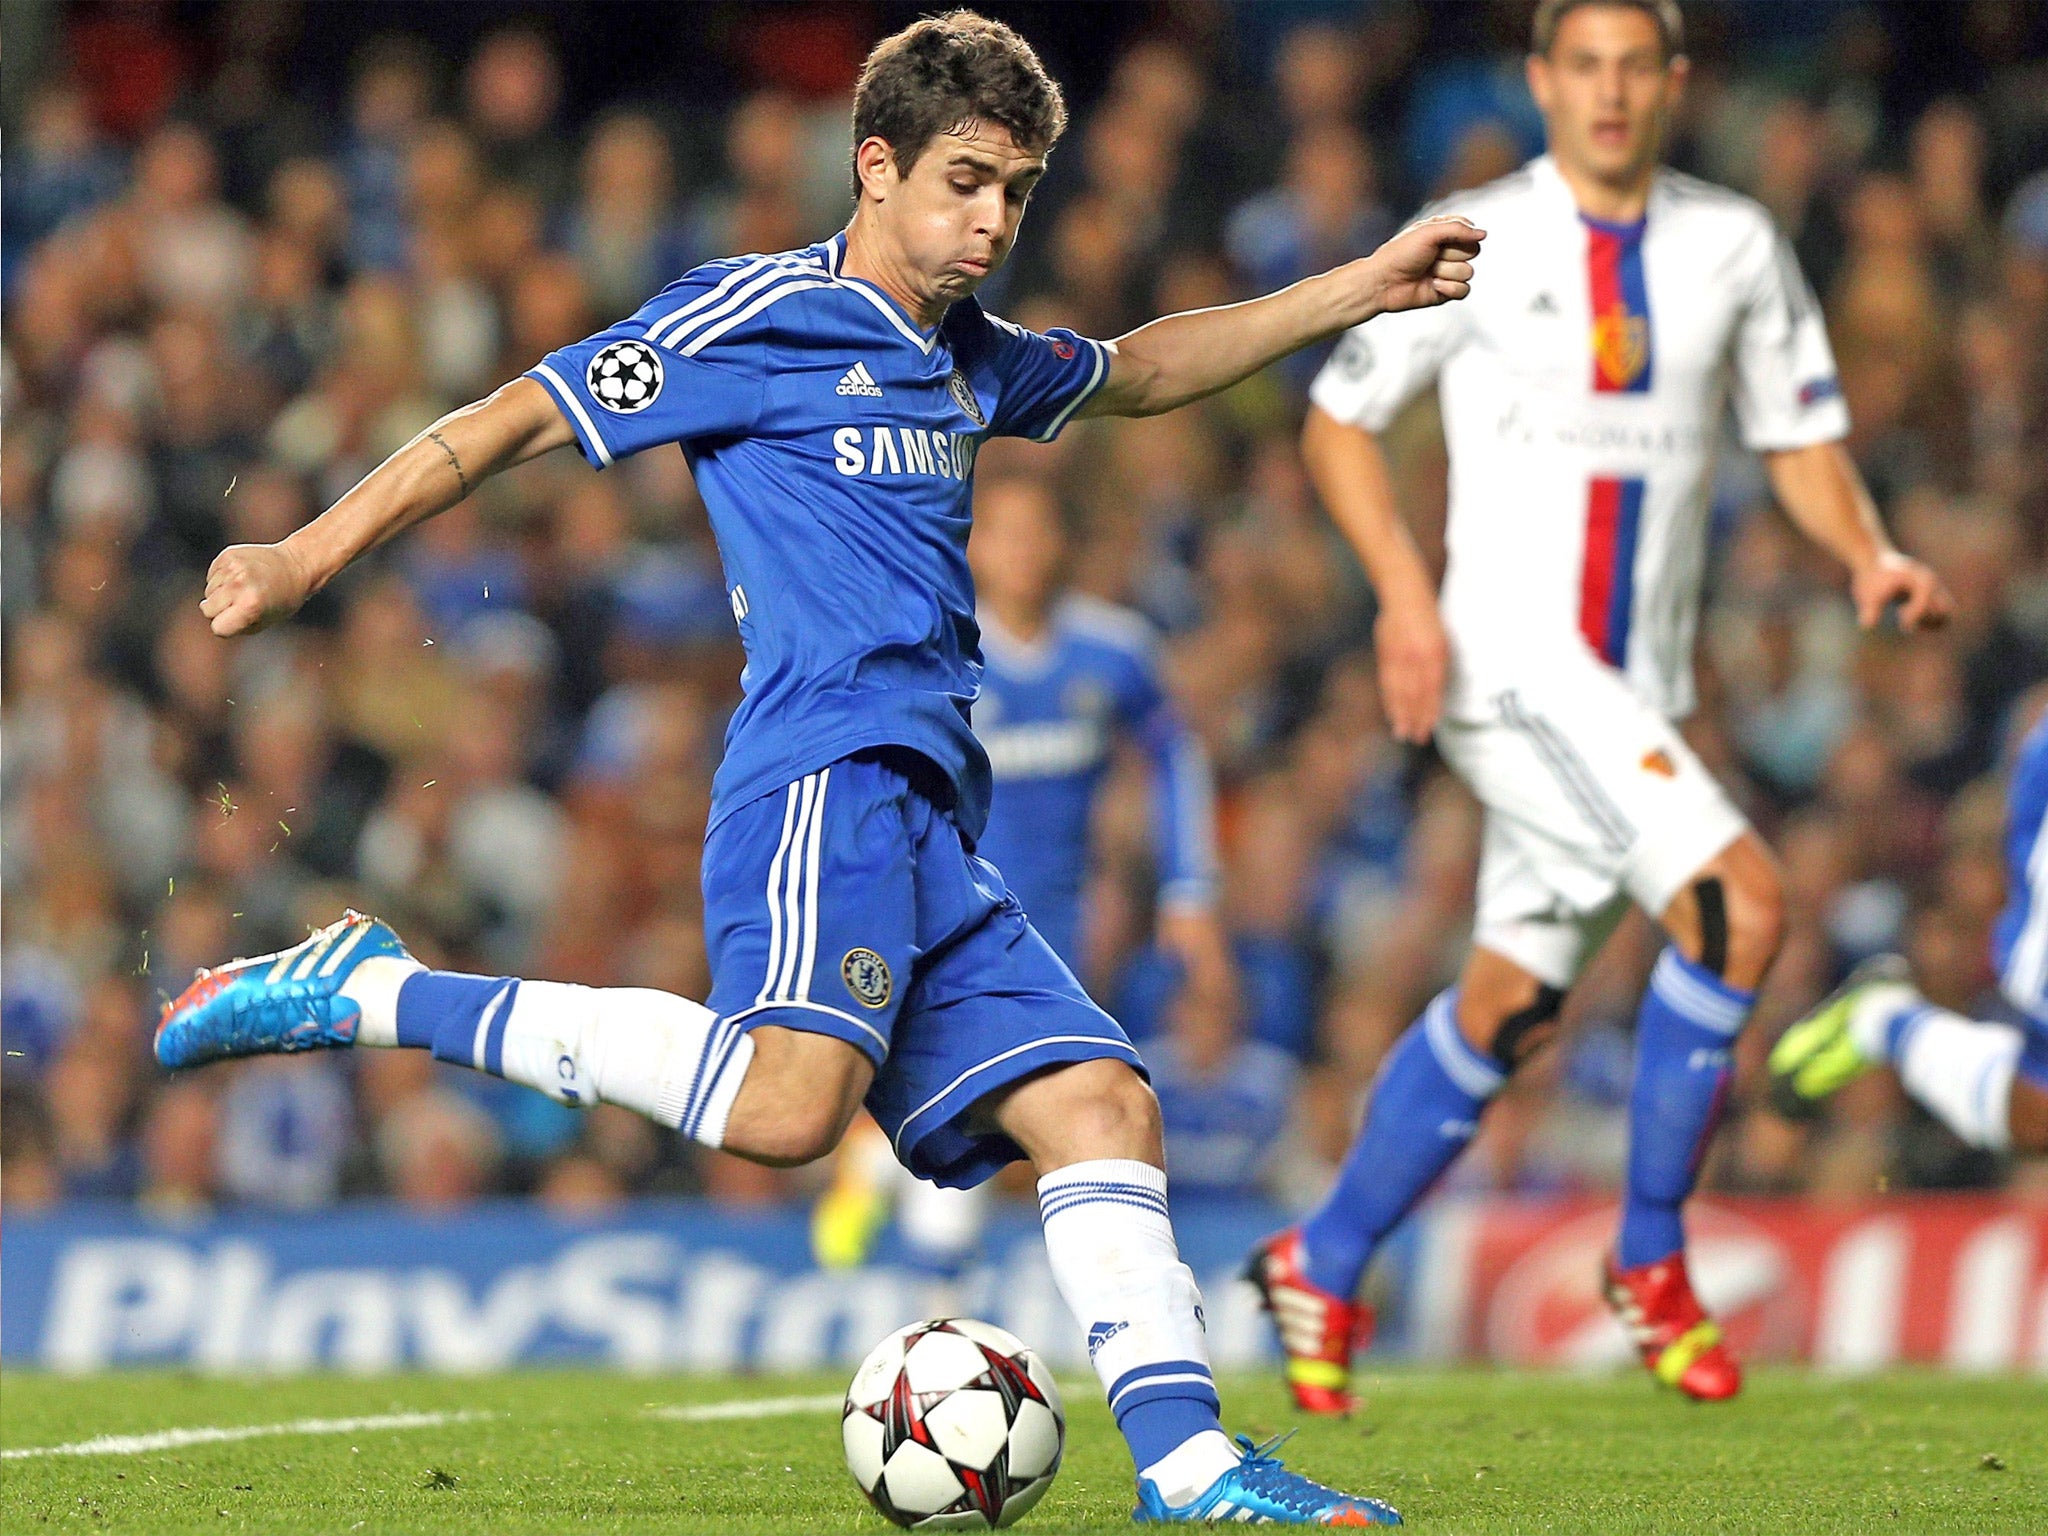 Oscar strikes to give Chelsea the lead on the stroke of half-time